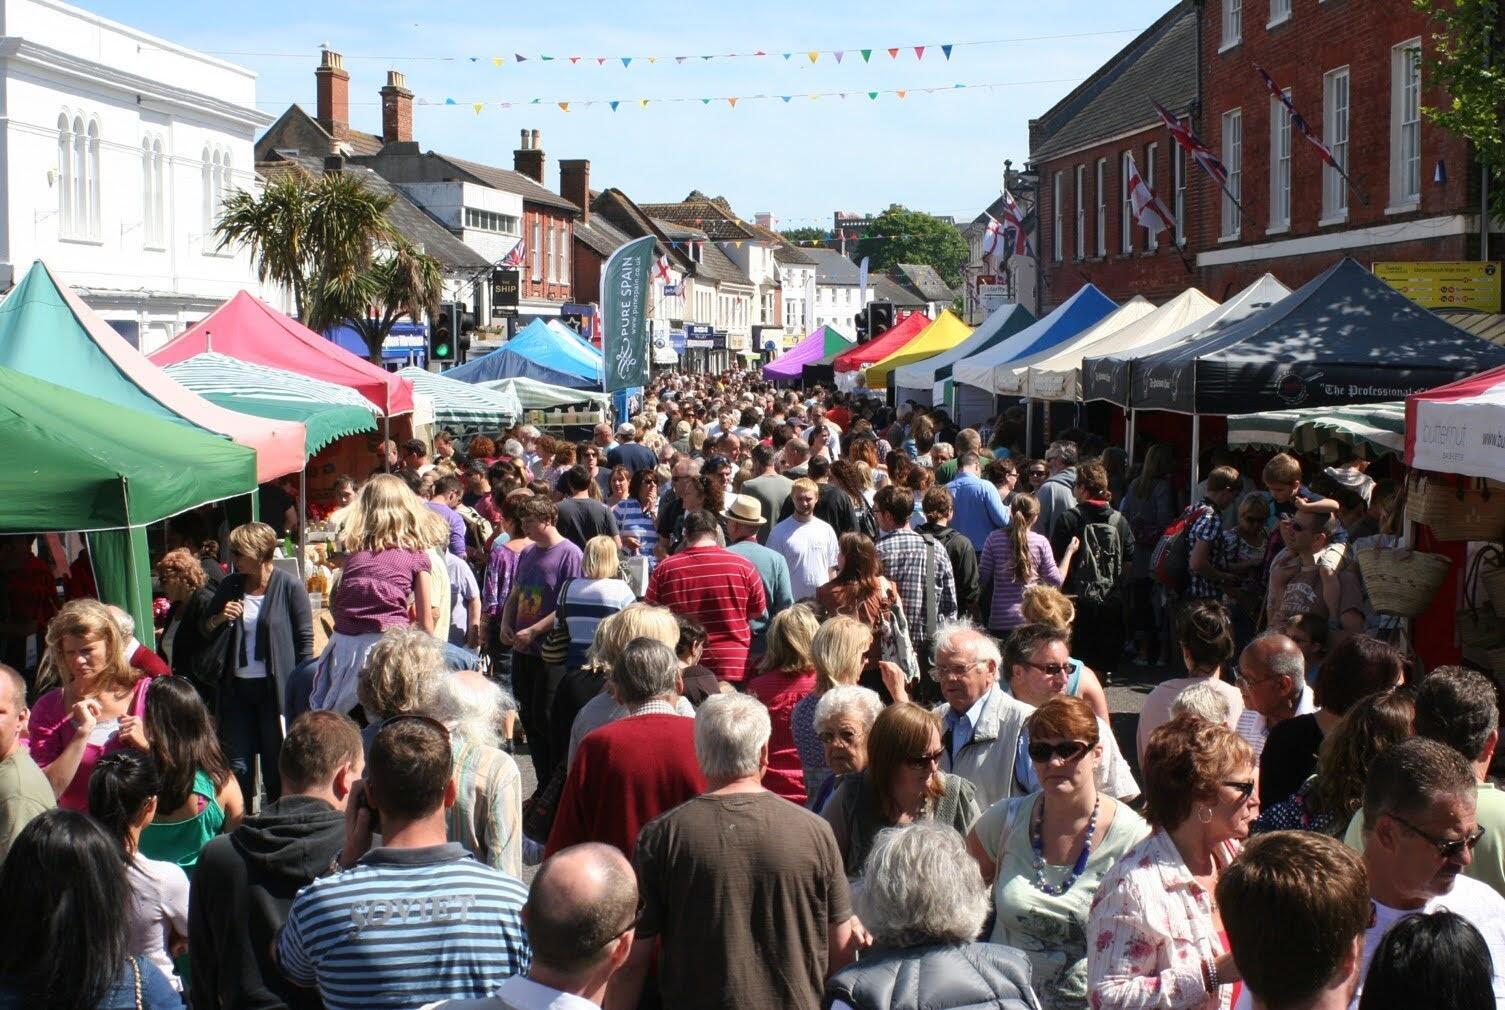 crowds of people at a street market in devizes wiltshire on a sunny day